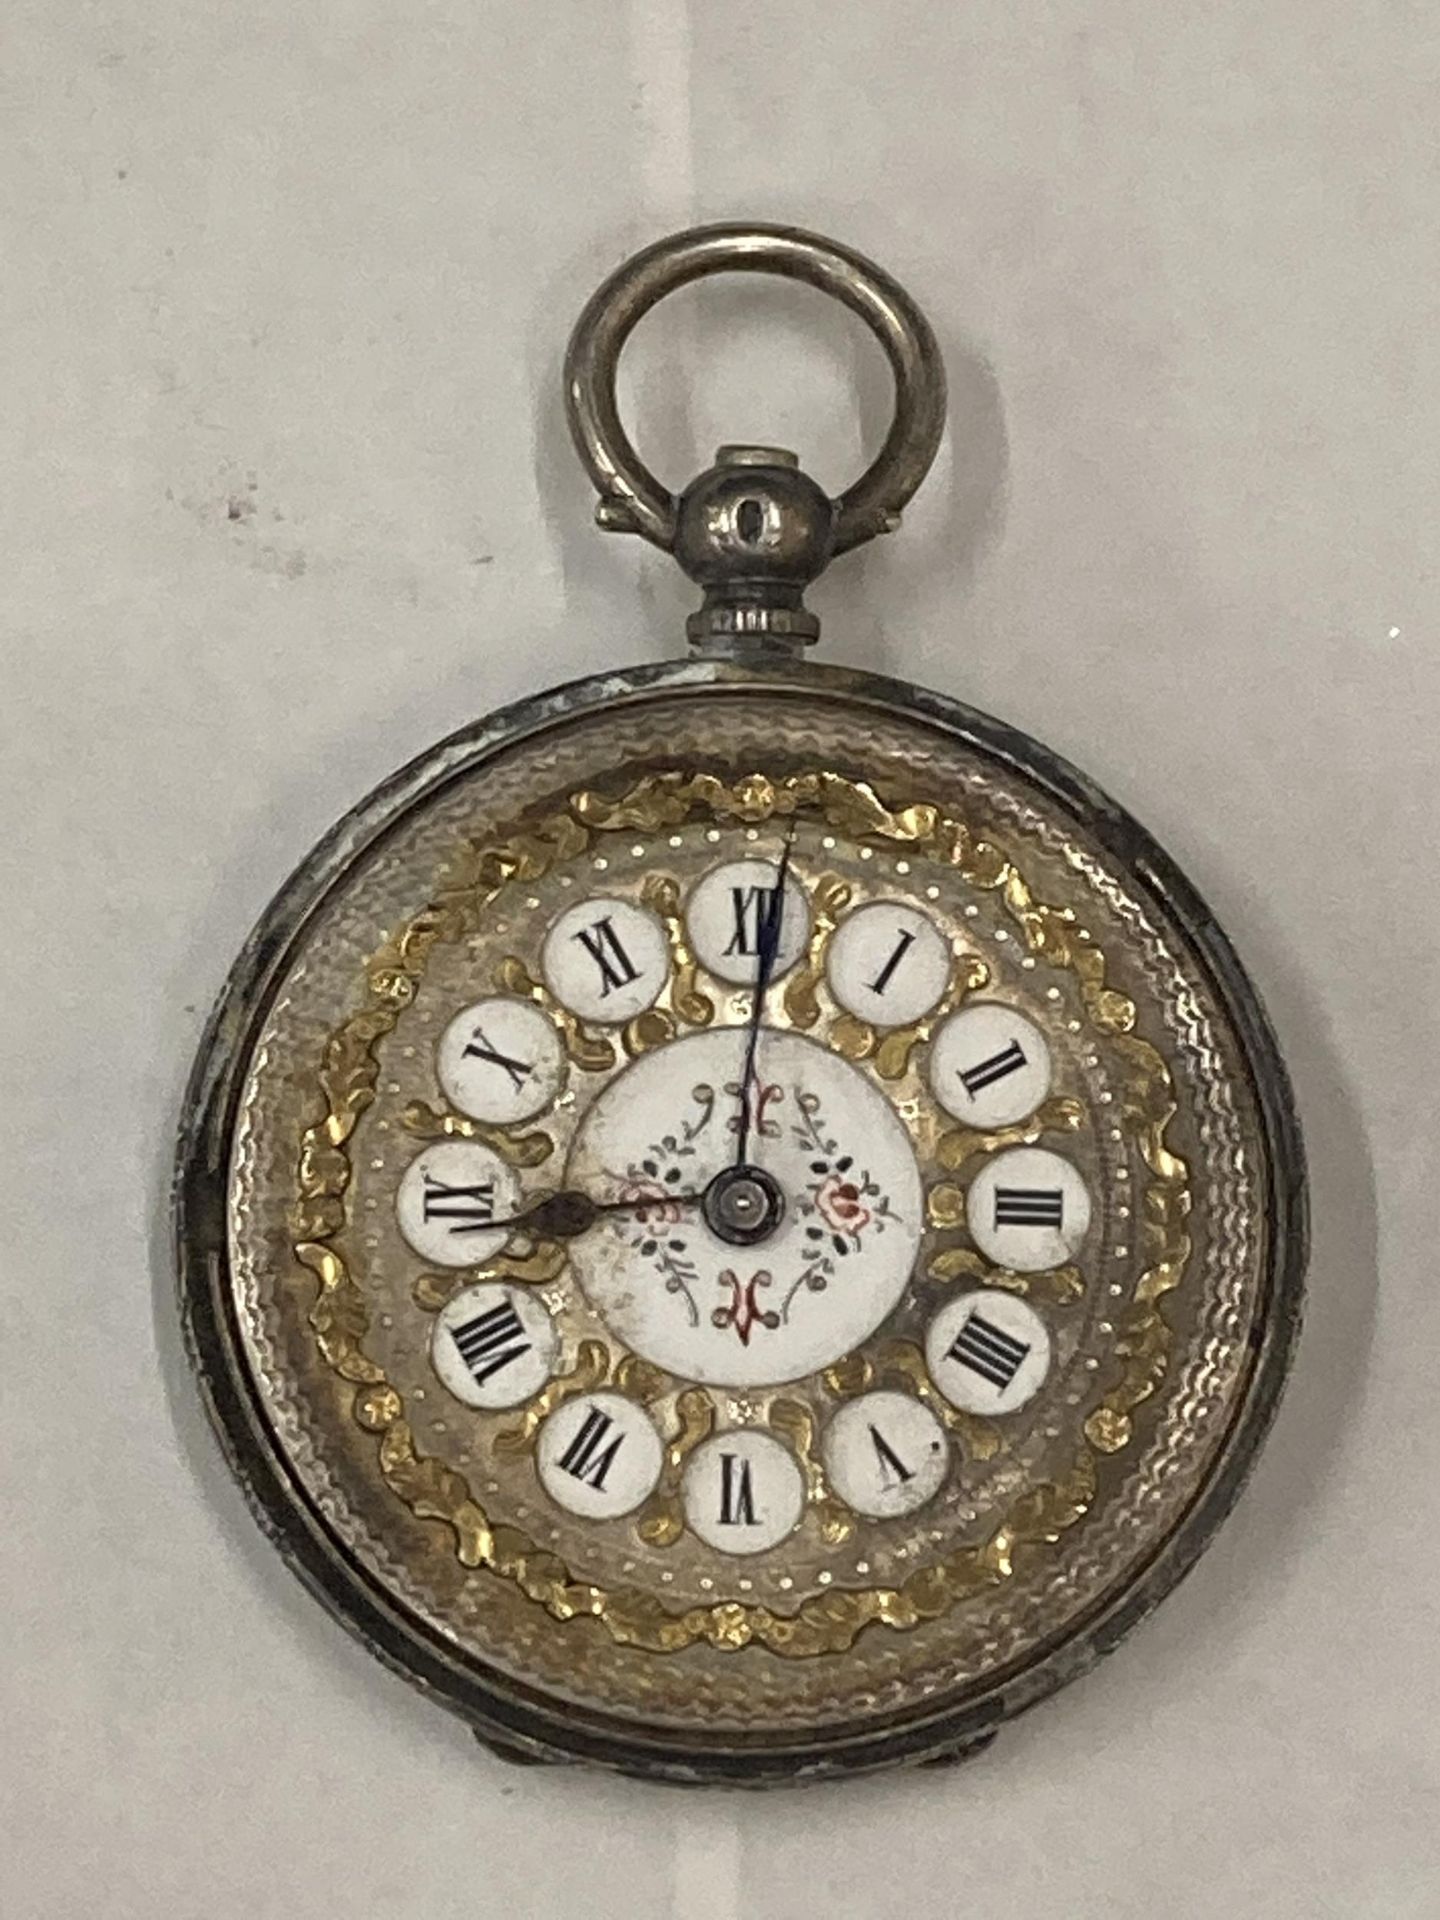 A DECORATIVE SILVER LADIES POCKET WATCH (MISSING GLASS)